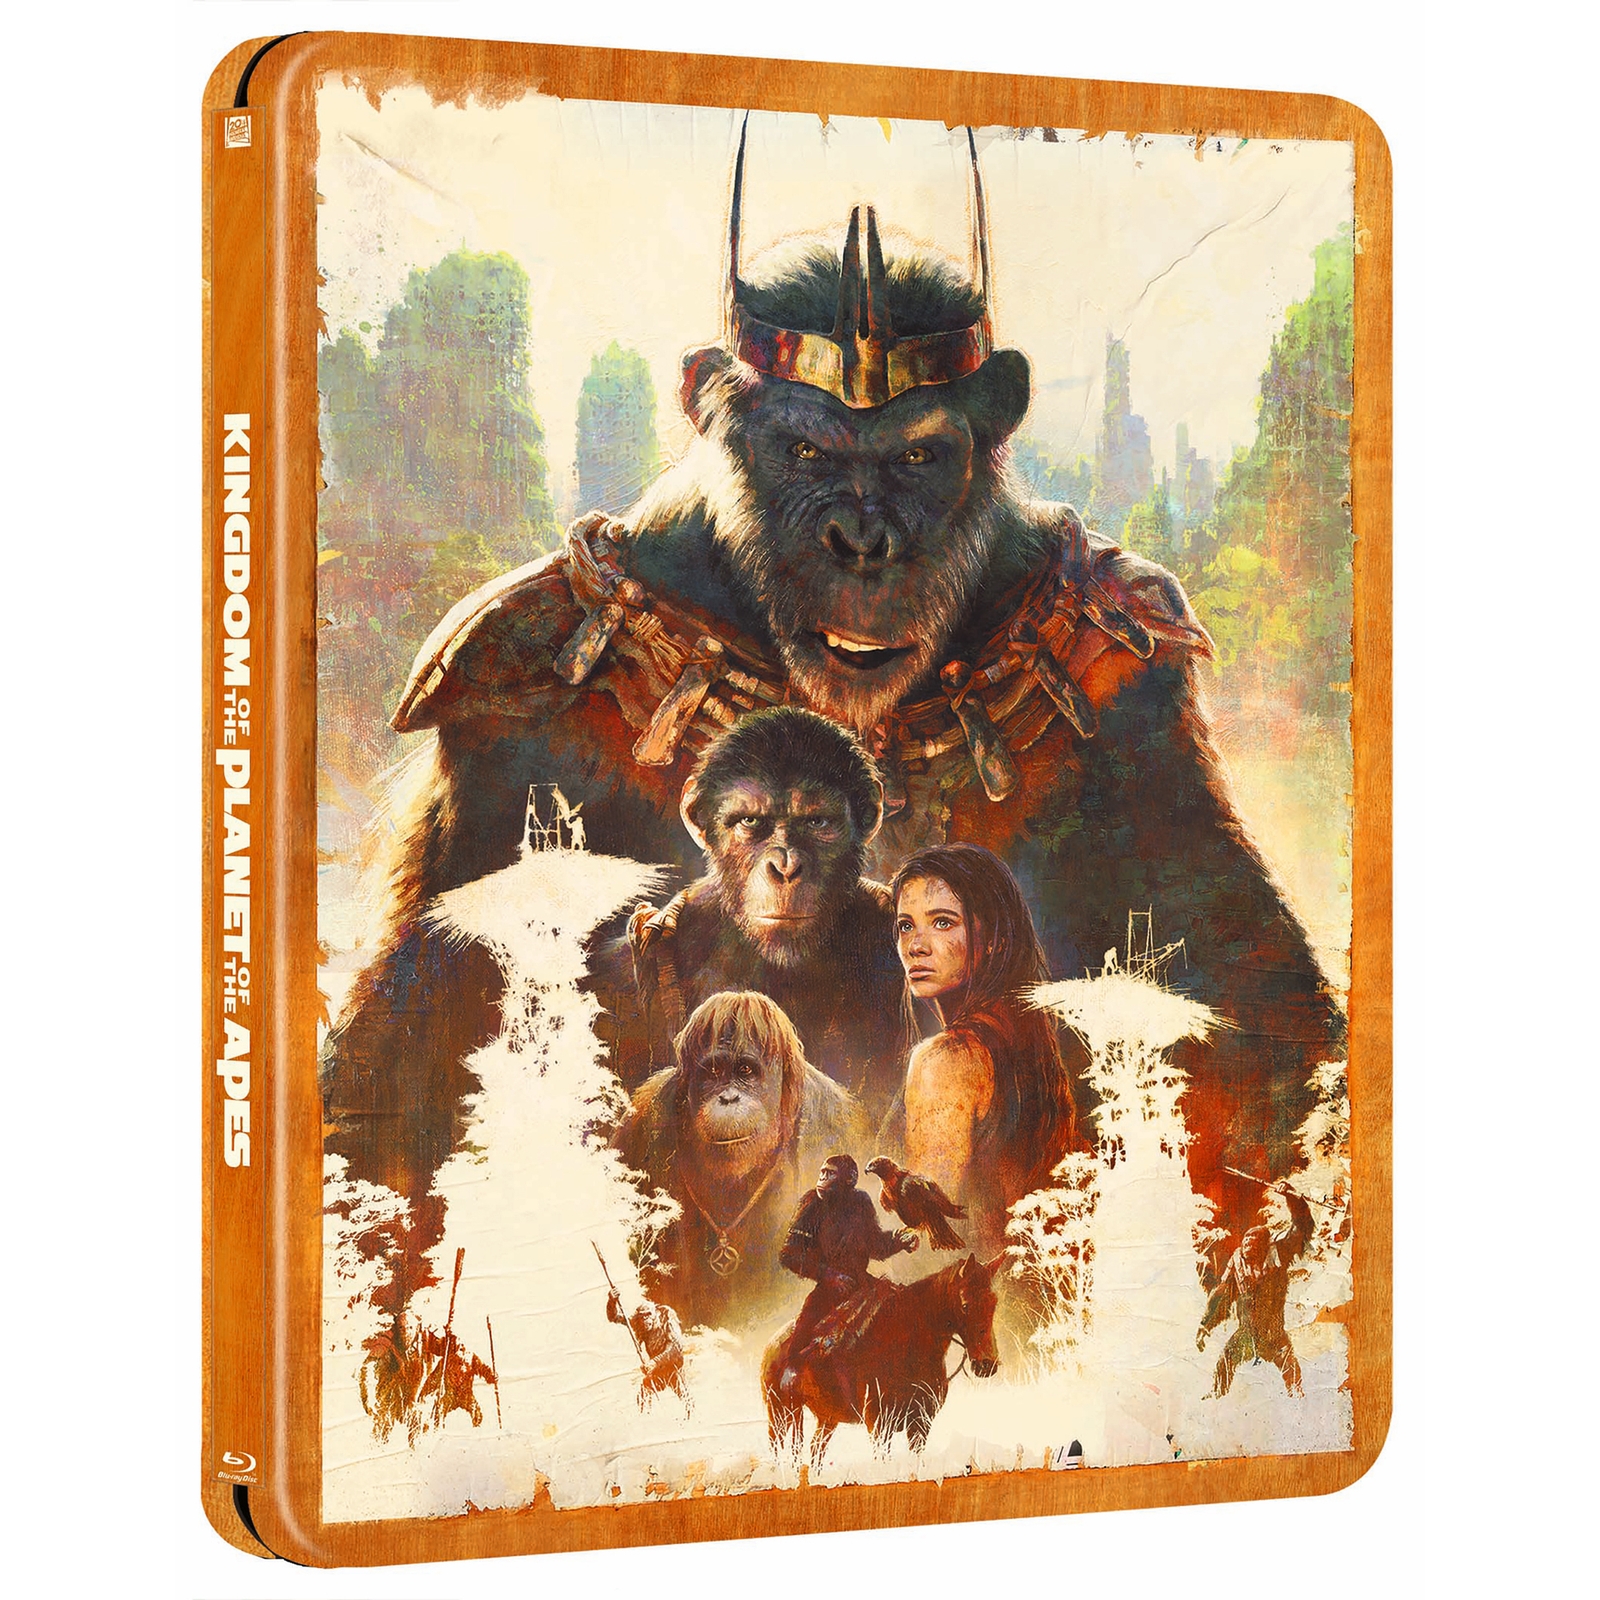 The Kingdom of The Planet Of The Apes 4K Ultra HD & Blu-ray Steelbook von Planet Of The Apes